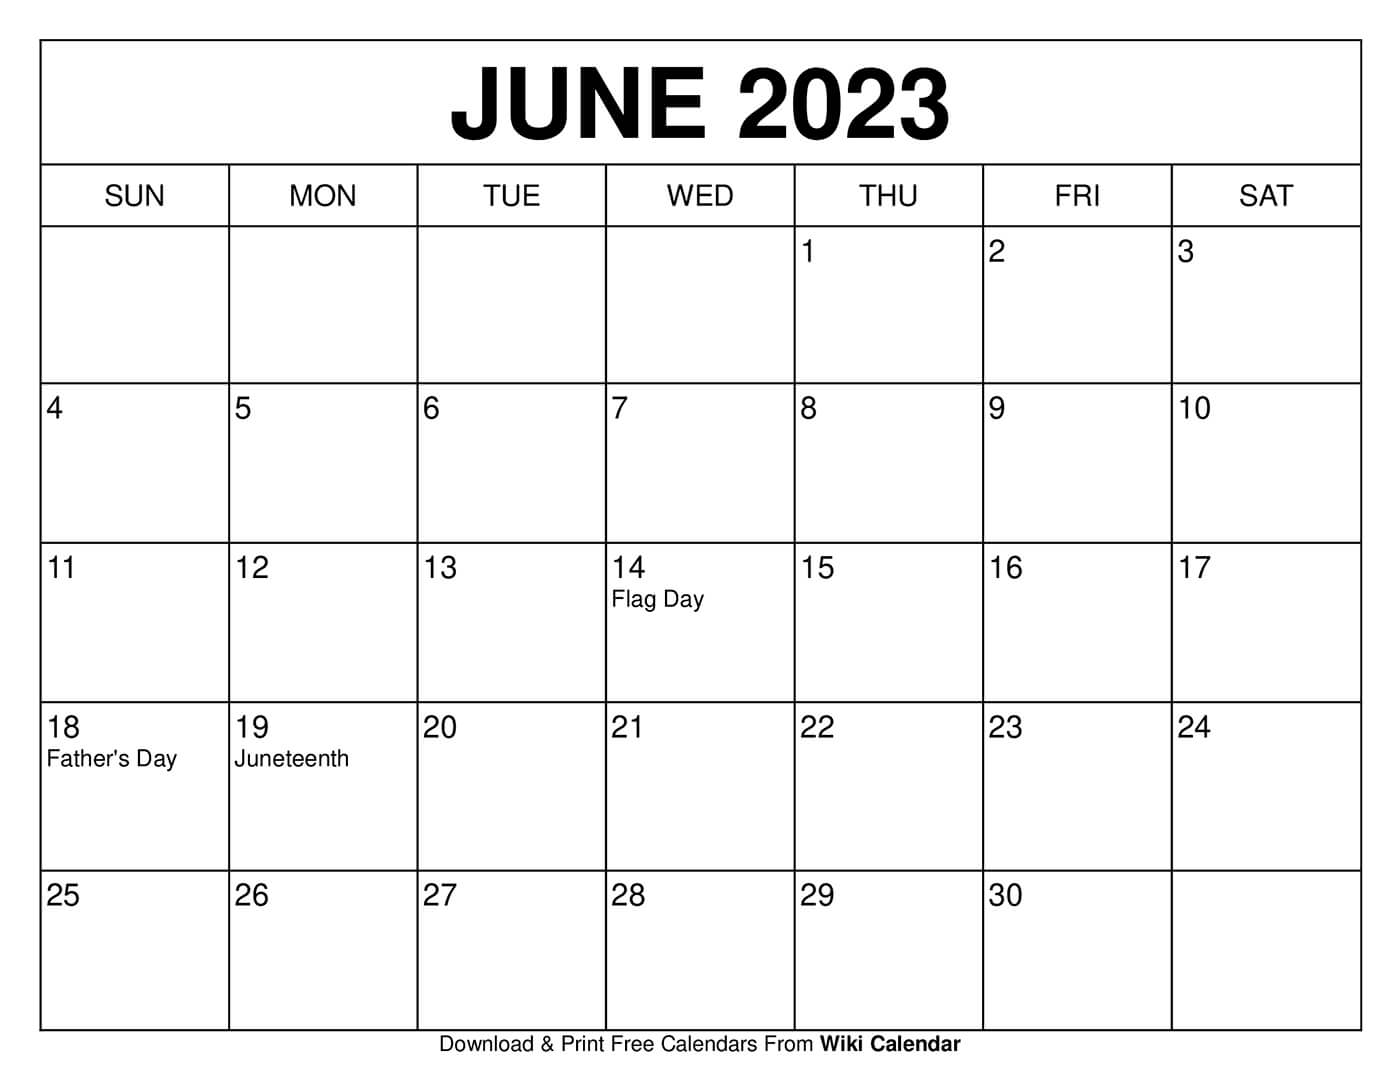 free-printable-june-2023-calendars-templates-with-holidays